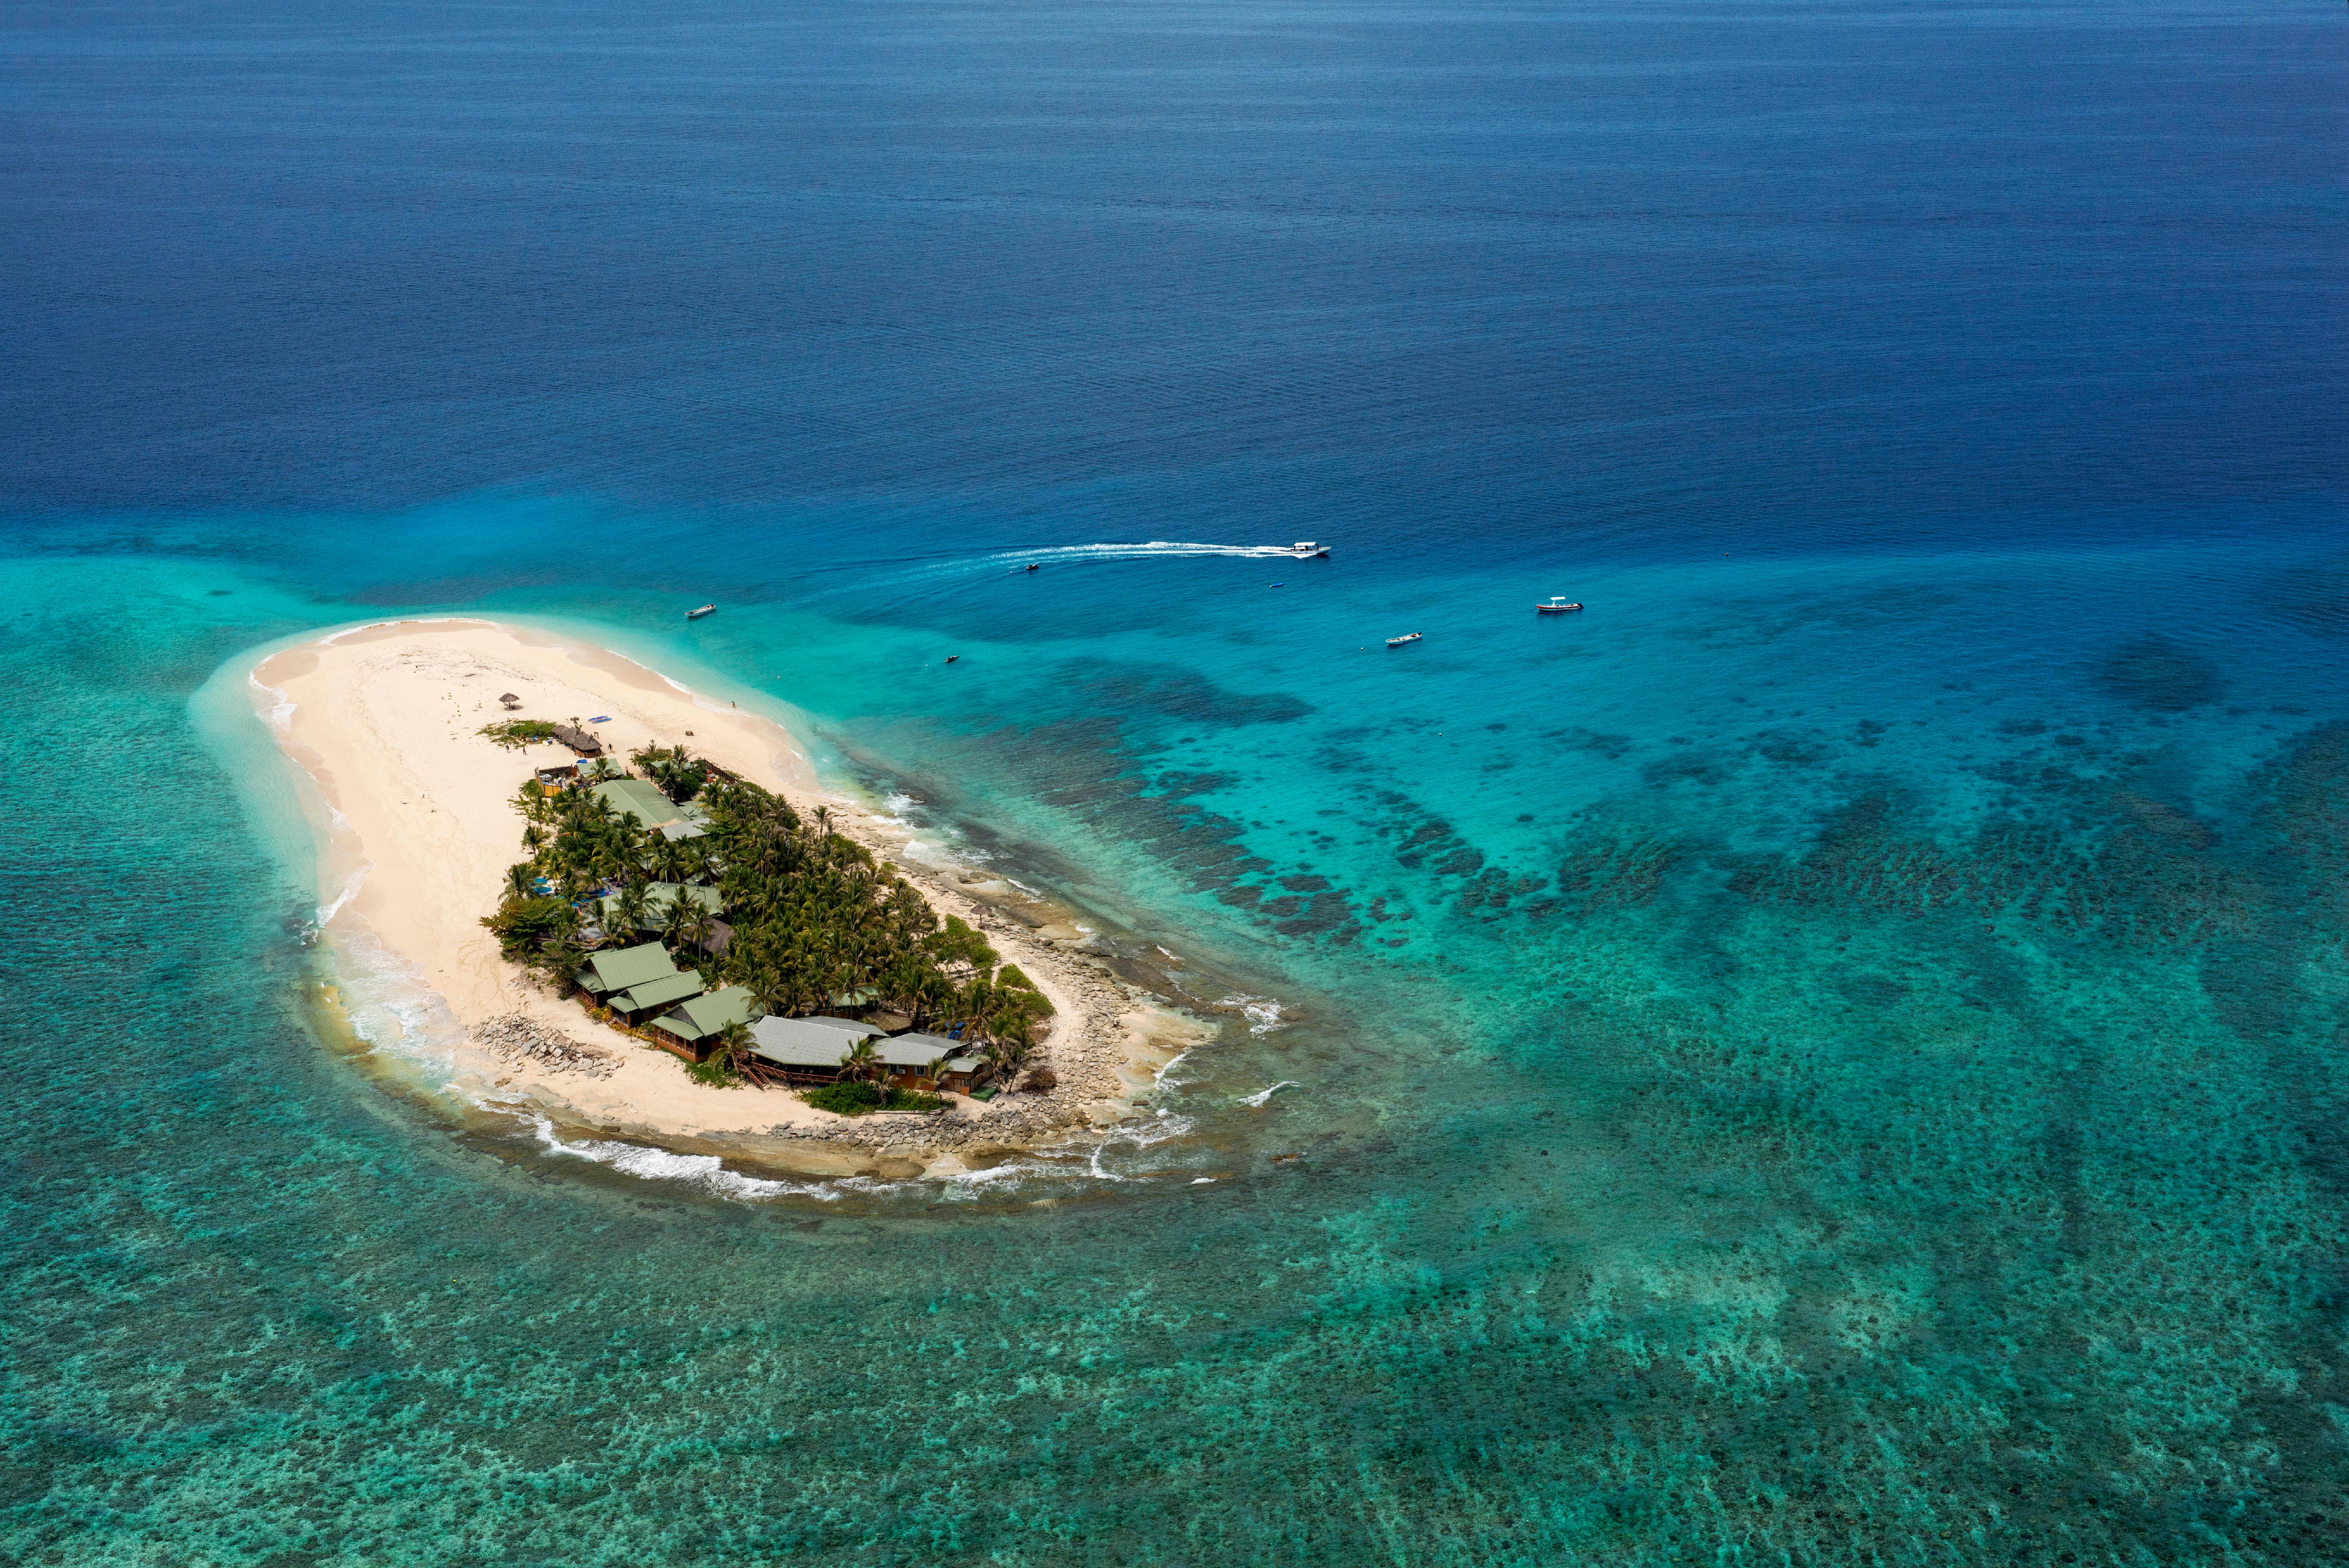 The Fiji Islands are also said to feel the effects of the quake through light tsunami waves.